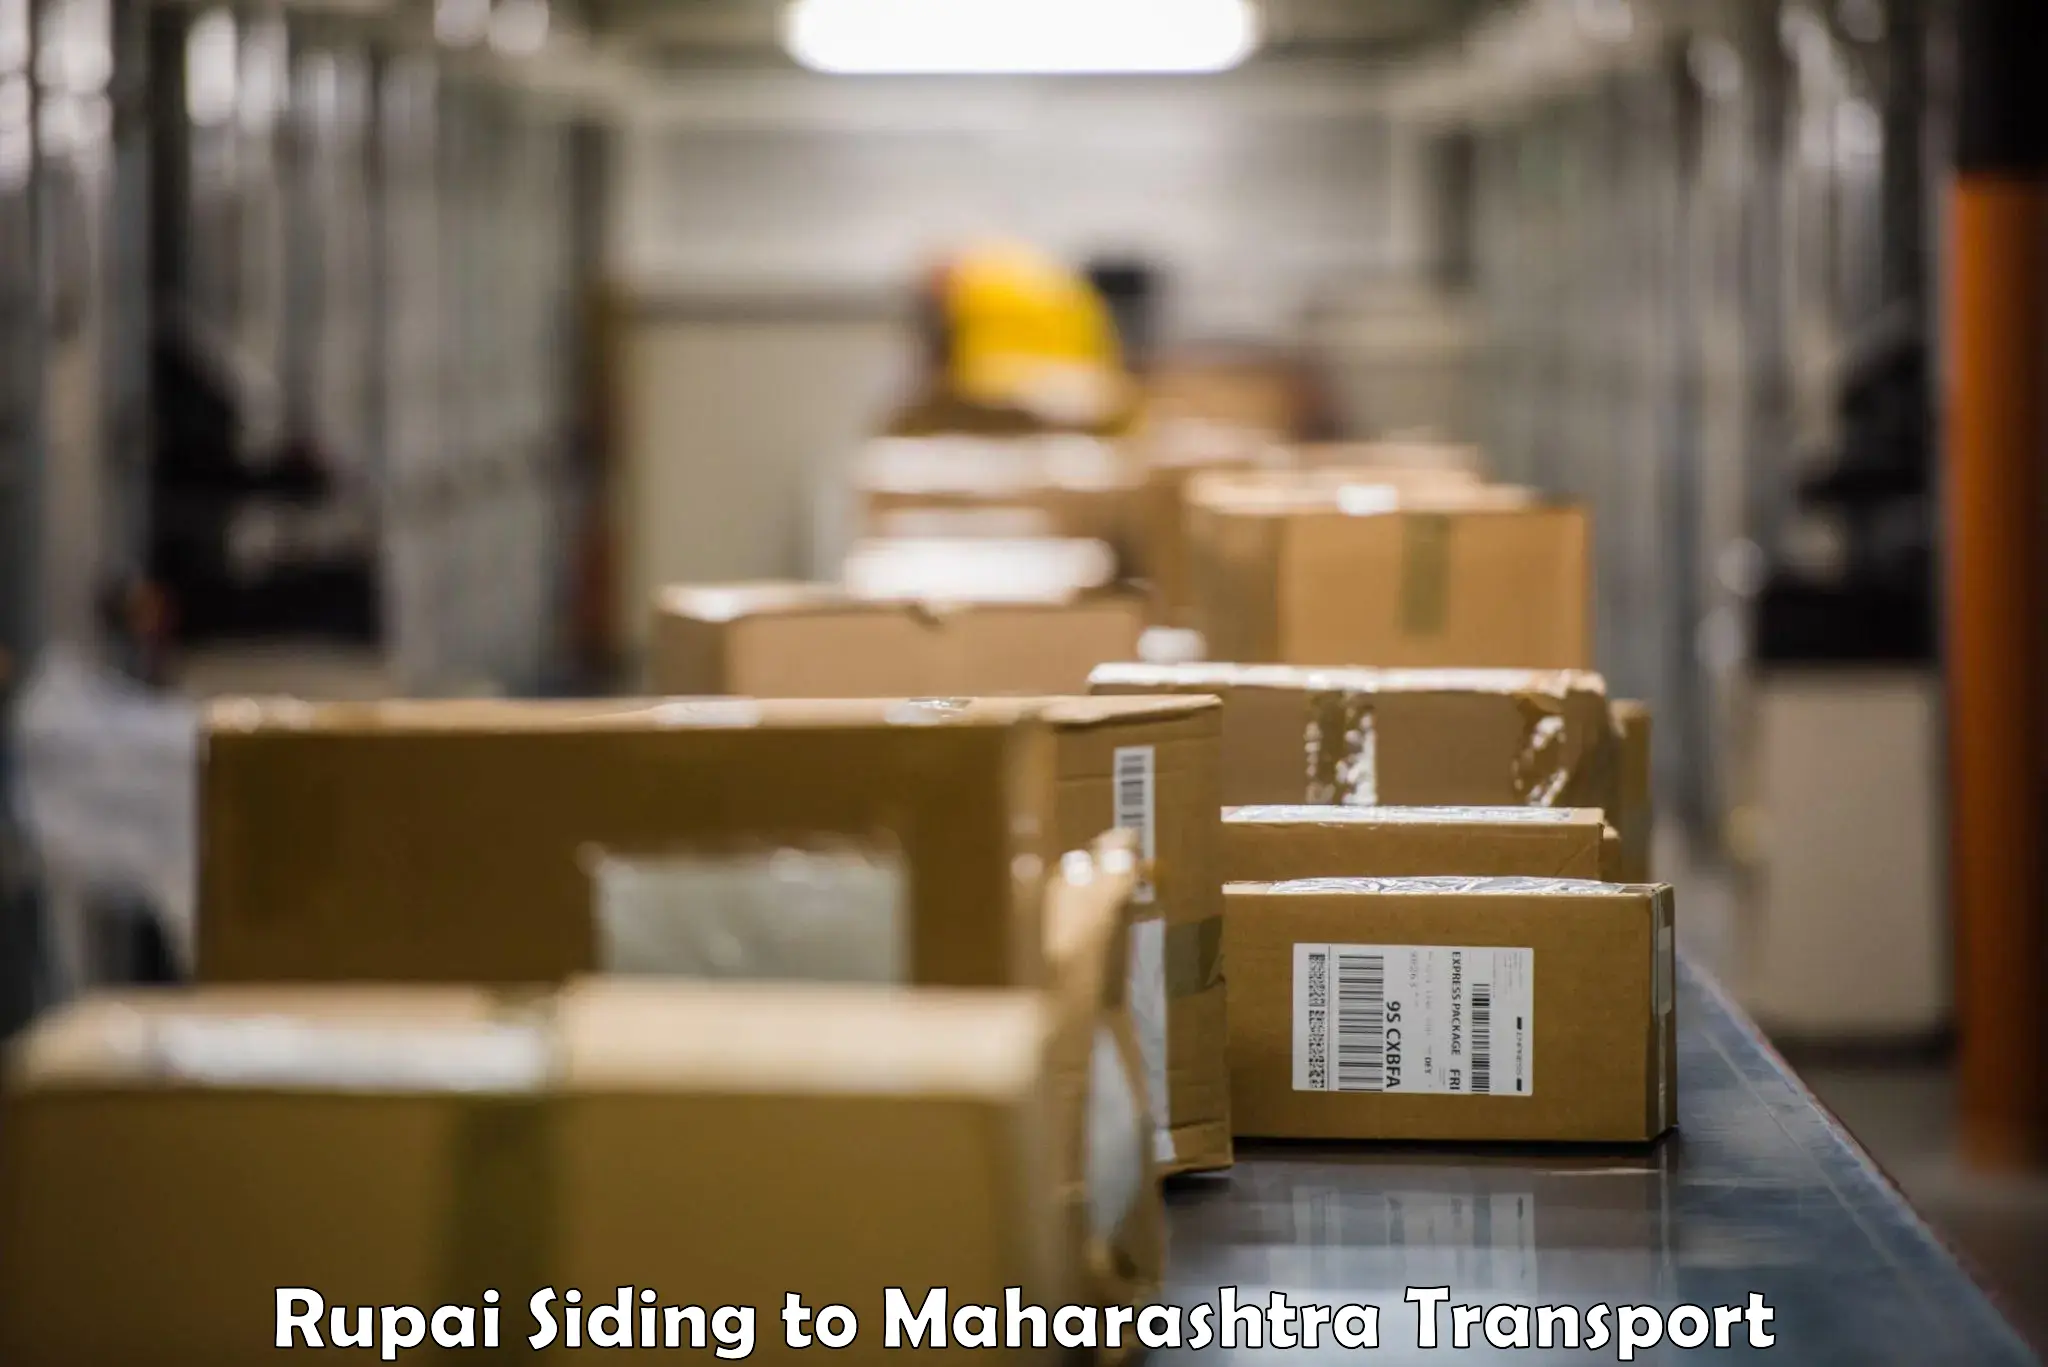 Transport shared services Rupai Siding to Talegaon Dabhade